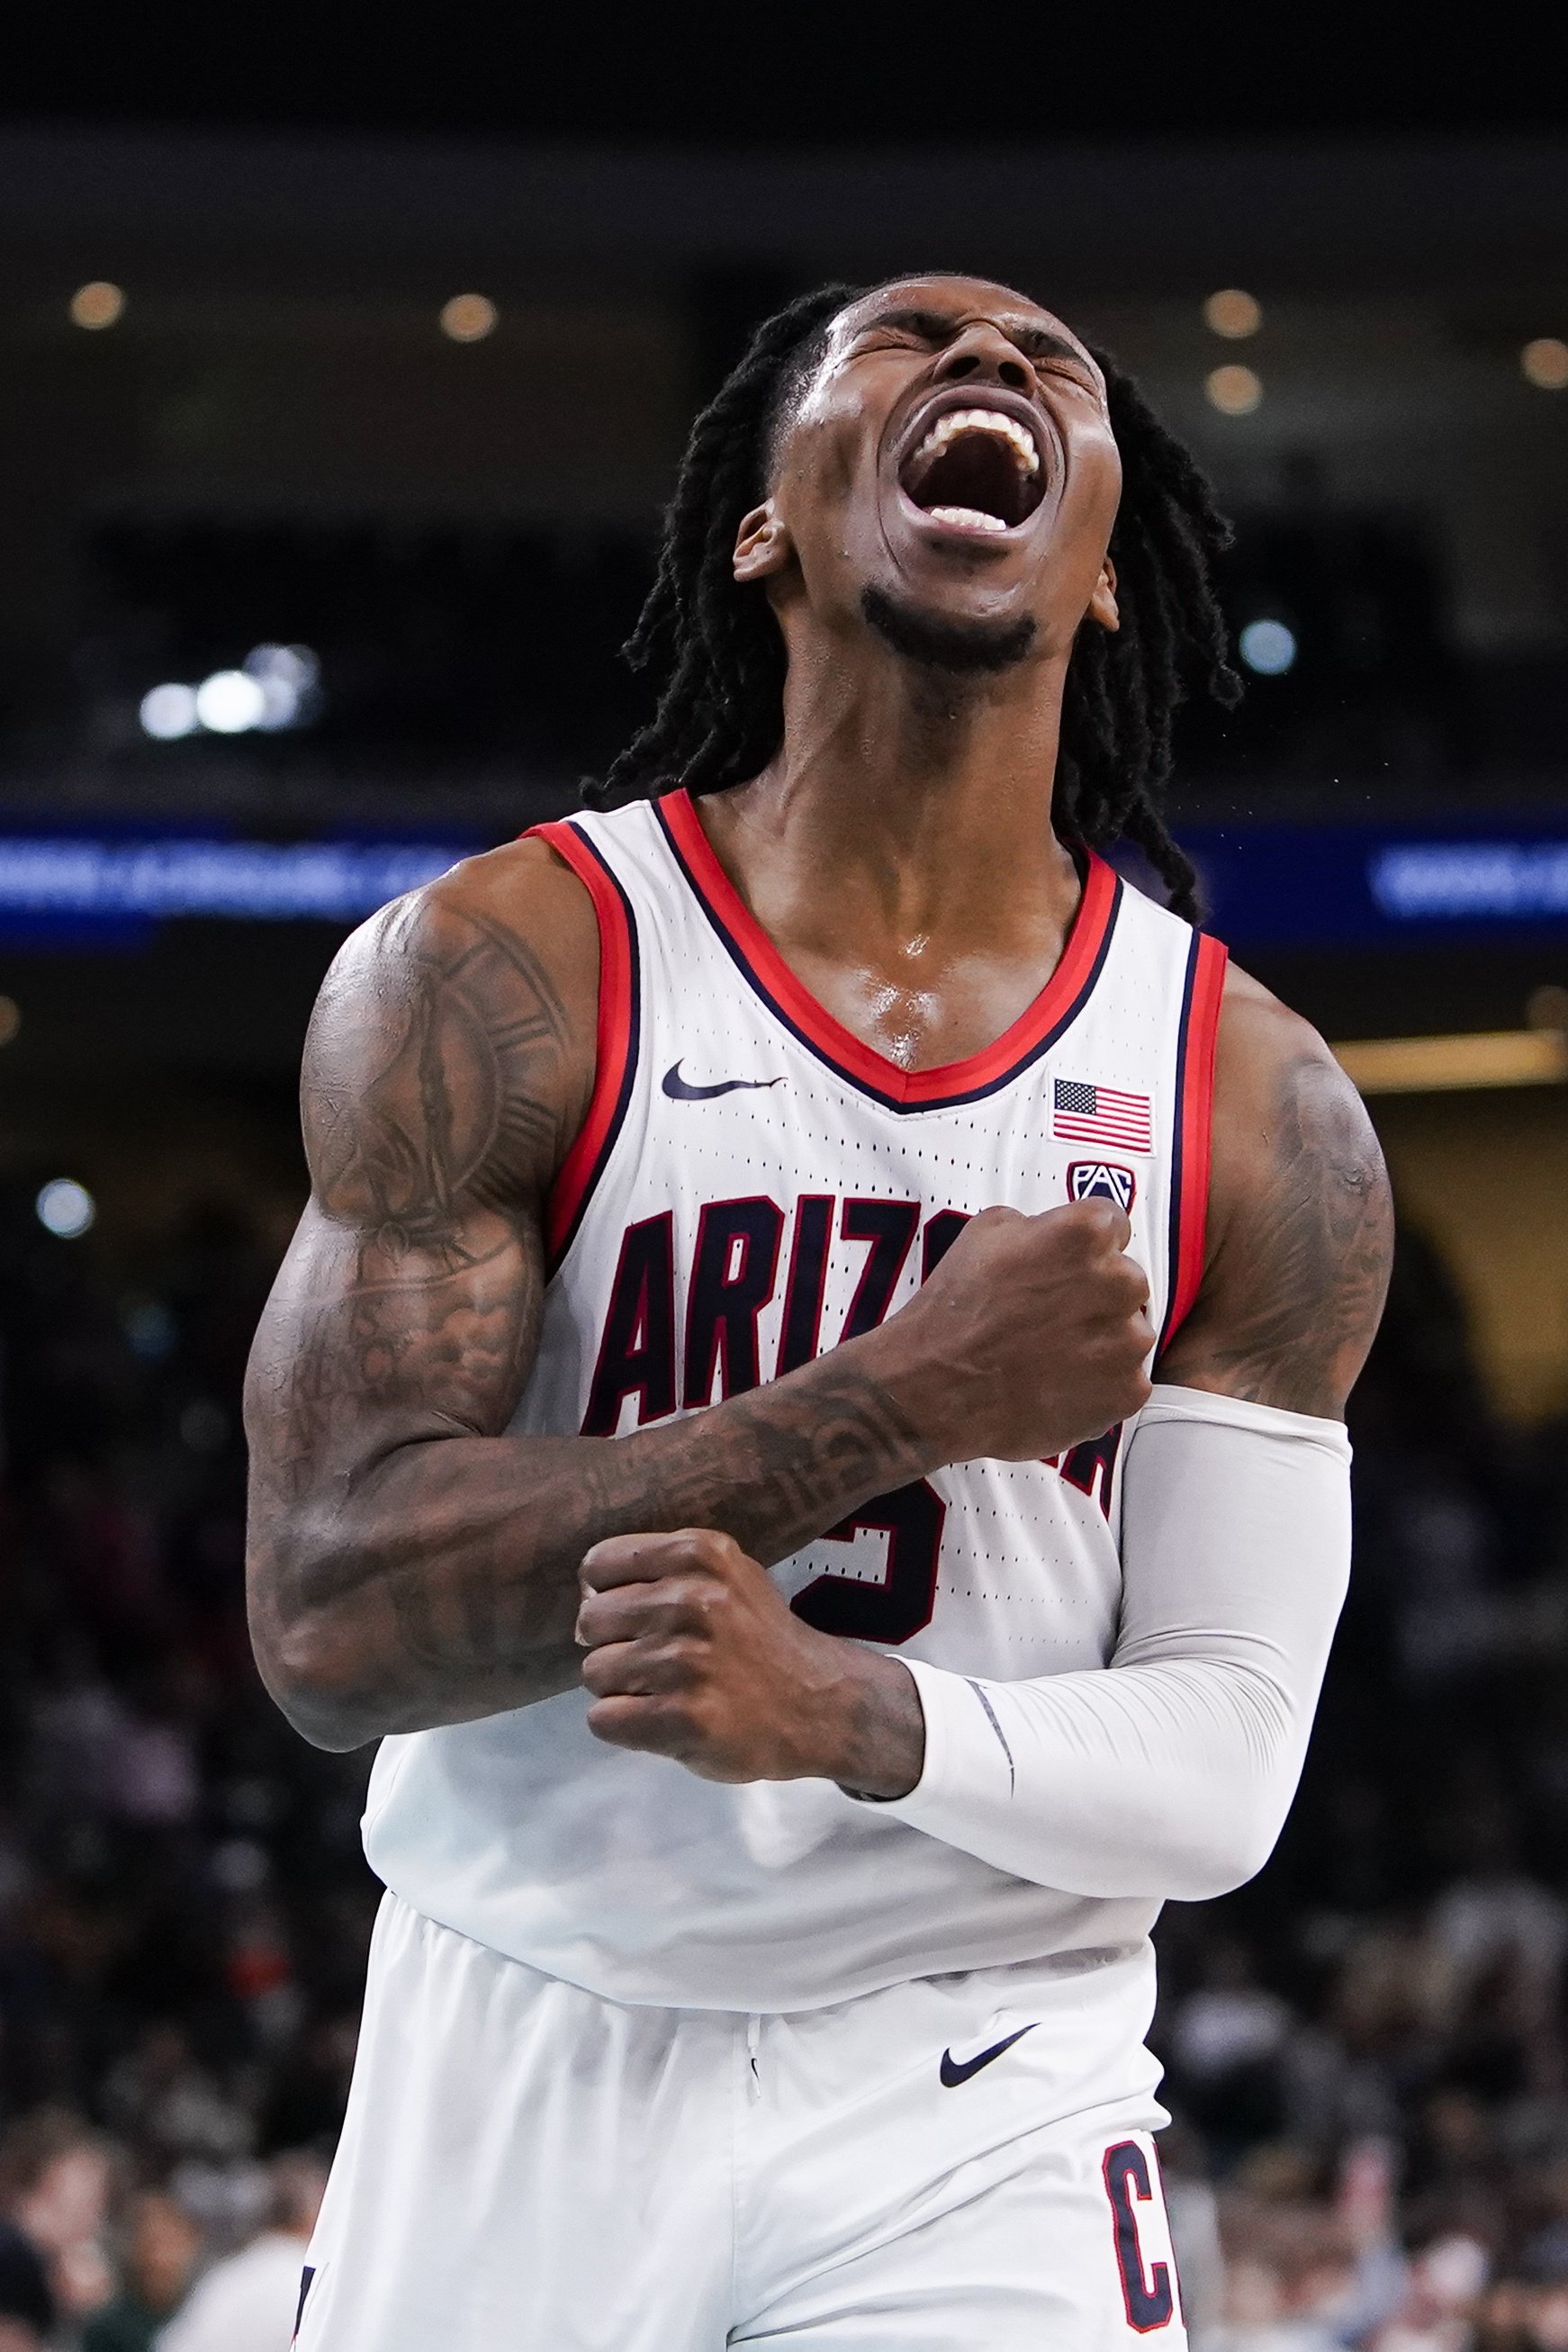  Arizona guard Caleb Love reacts after making a buzzer-beater 3-point basket to end the first half of an NCAA college basketball game against Michigan State, Thursday, Nov. 23, 2023, in Palm Desert, Calif. 